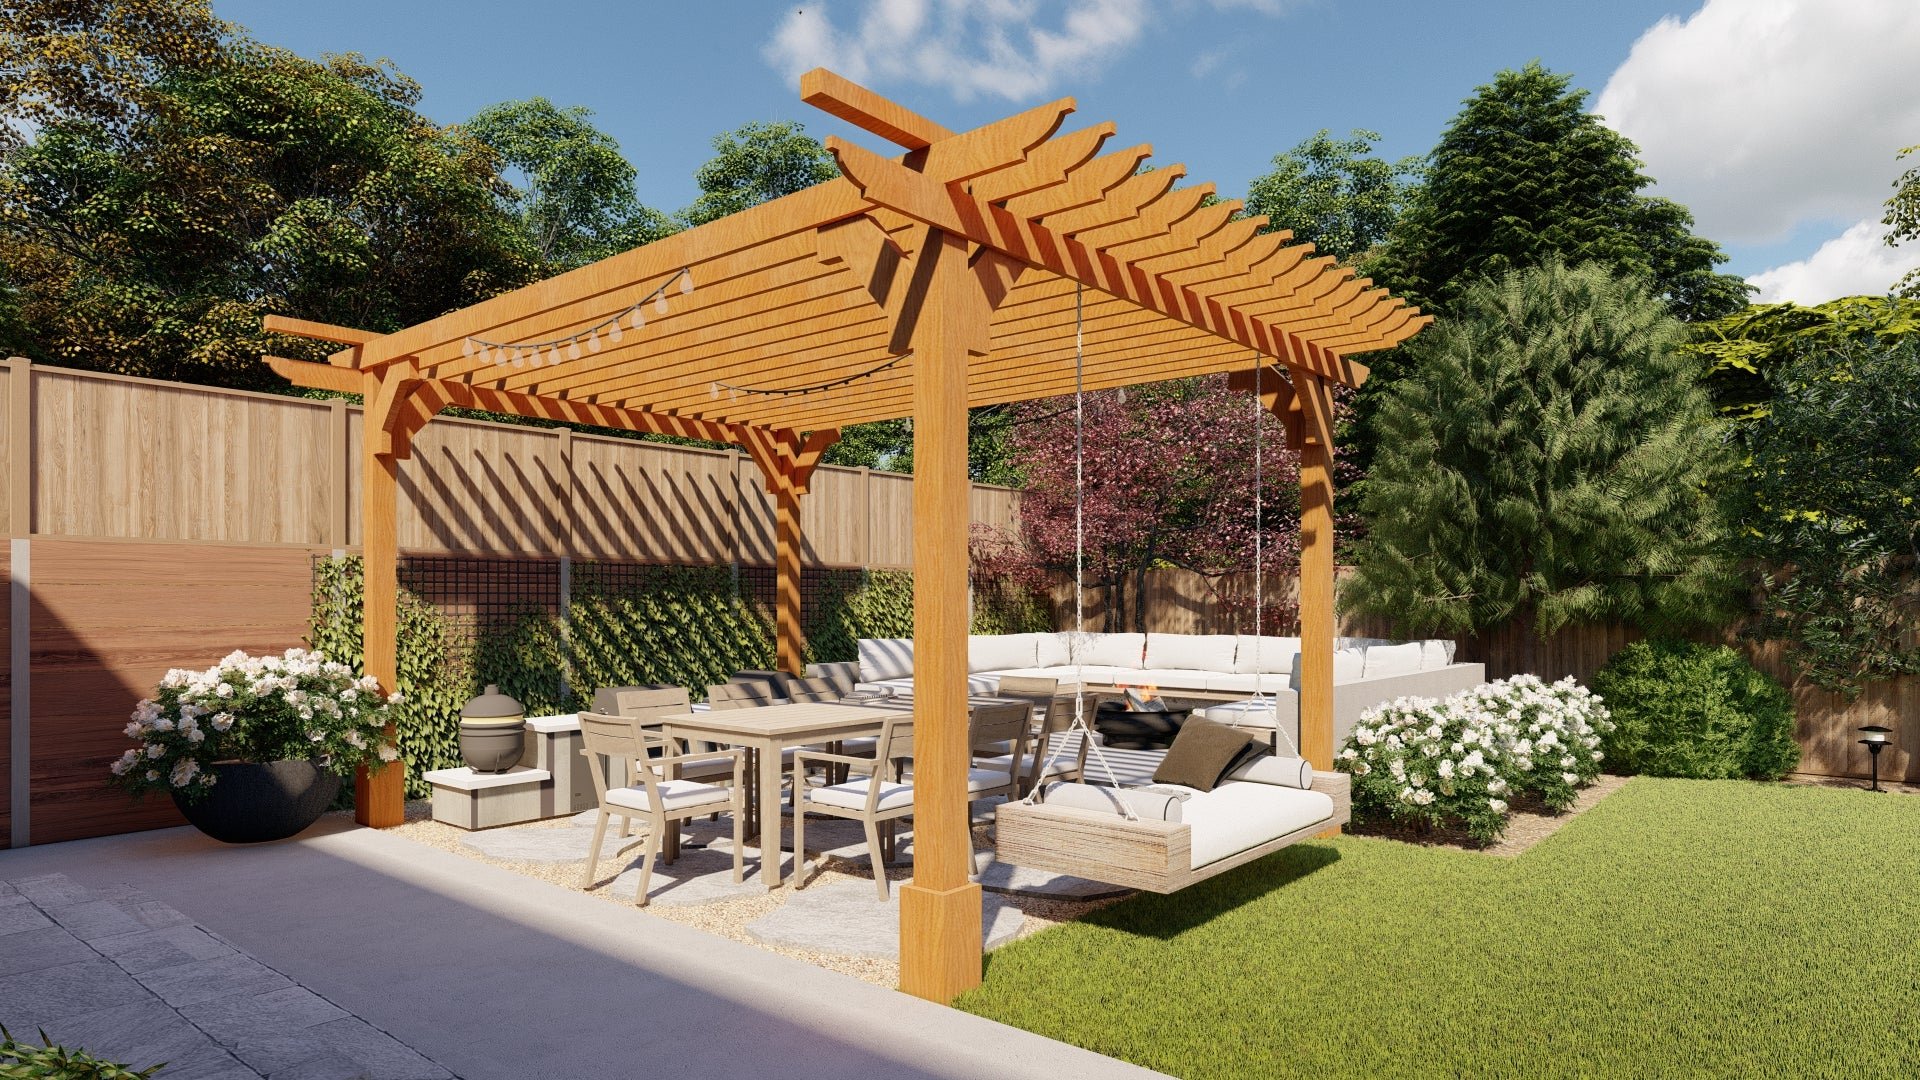 3D rendering of new landscape design with pergola-covered outdoor kitchen and dining area